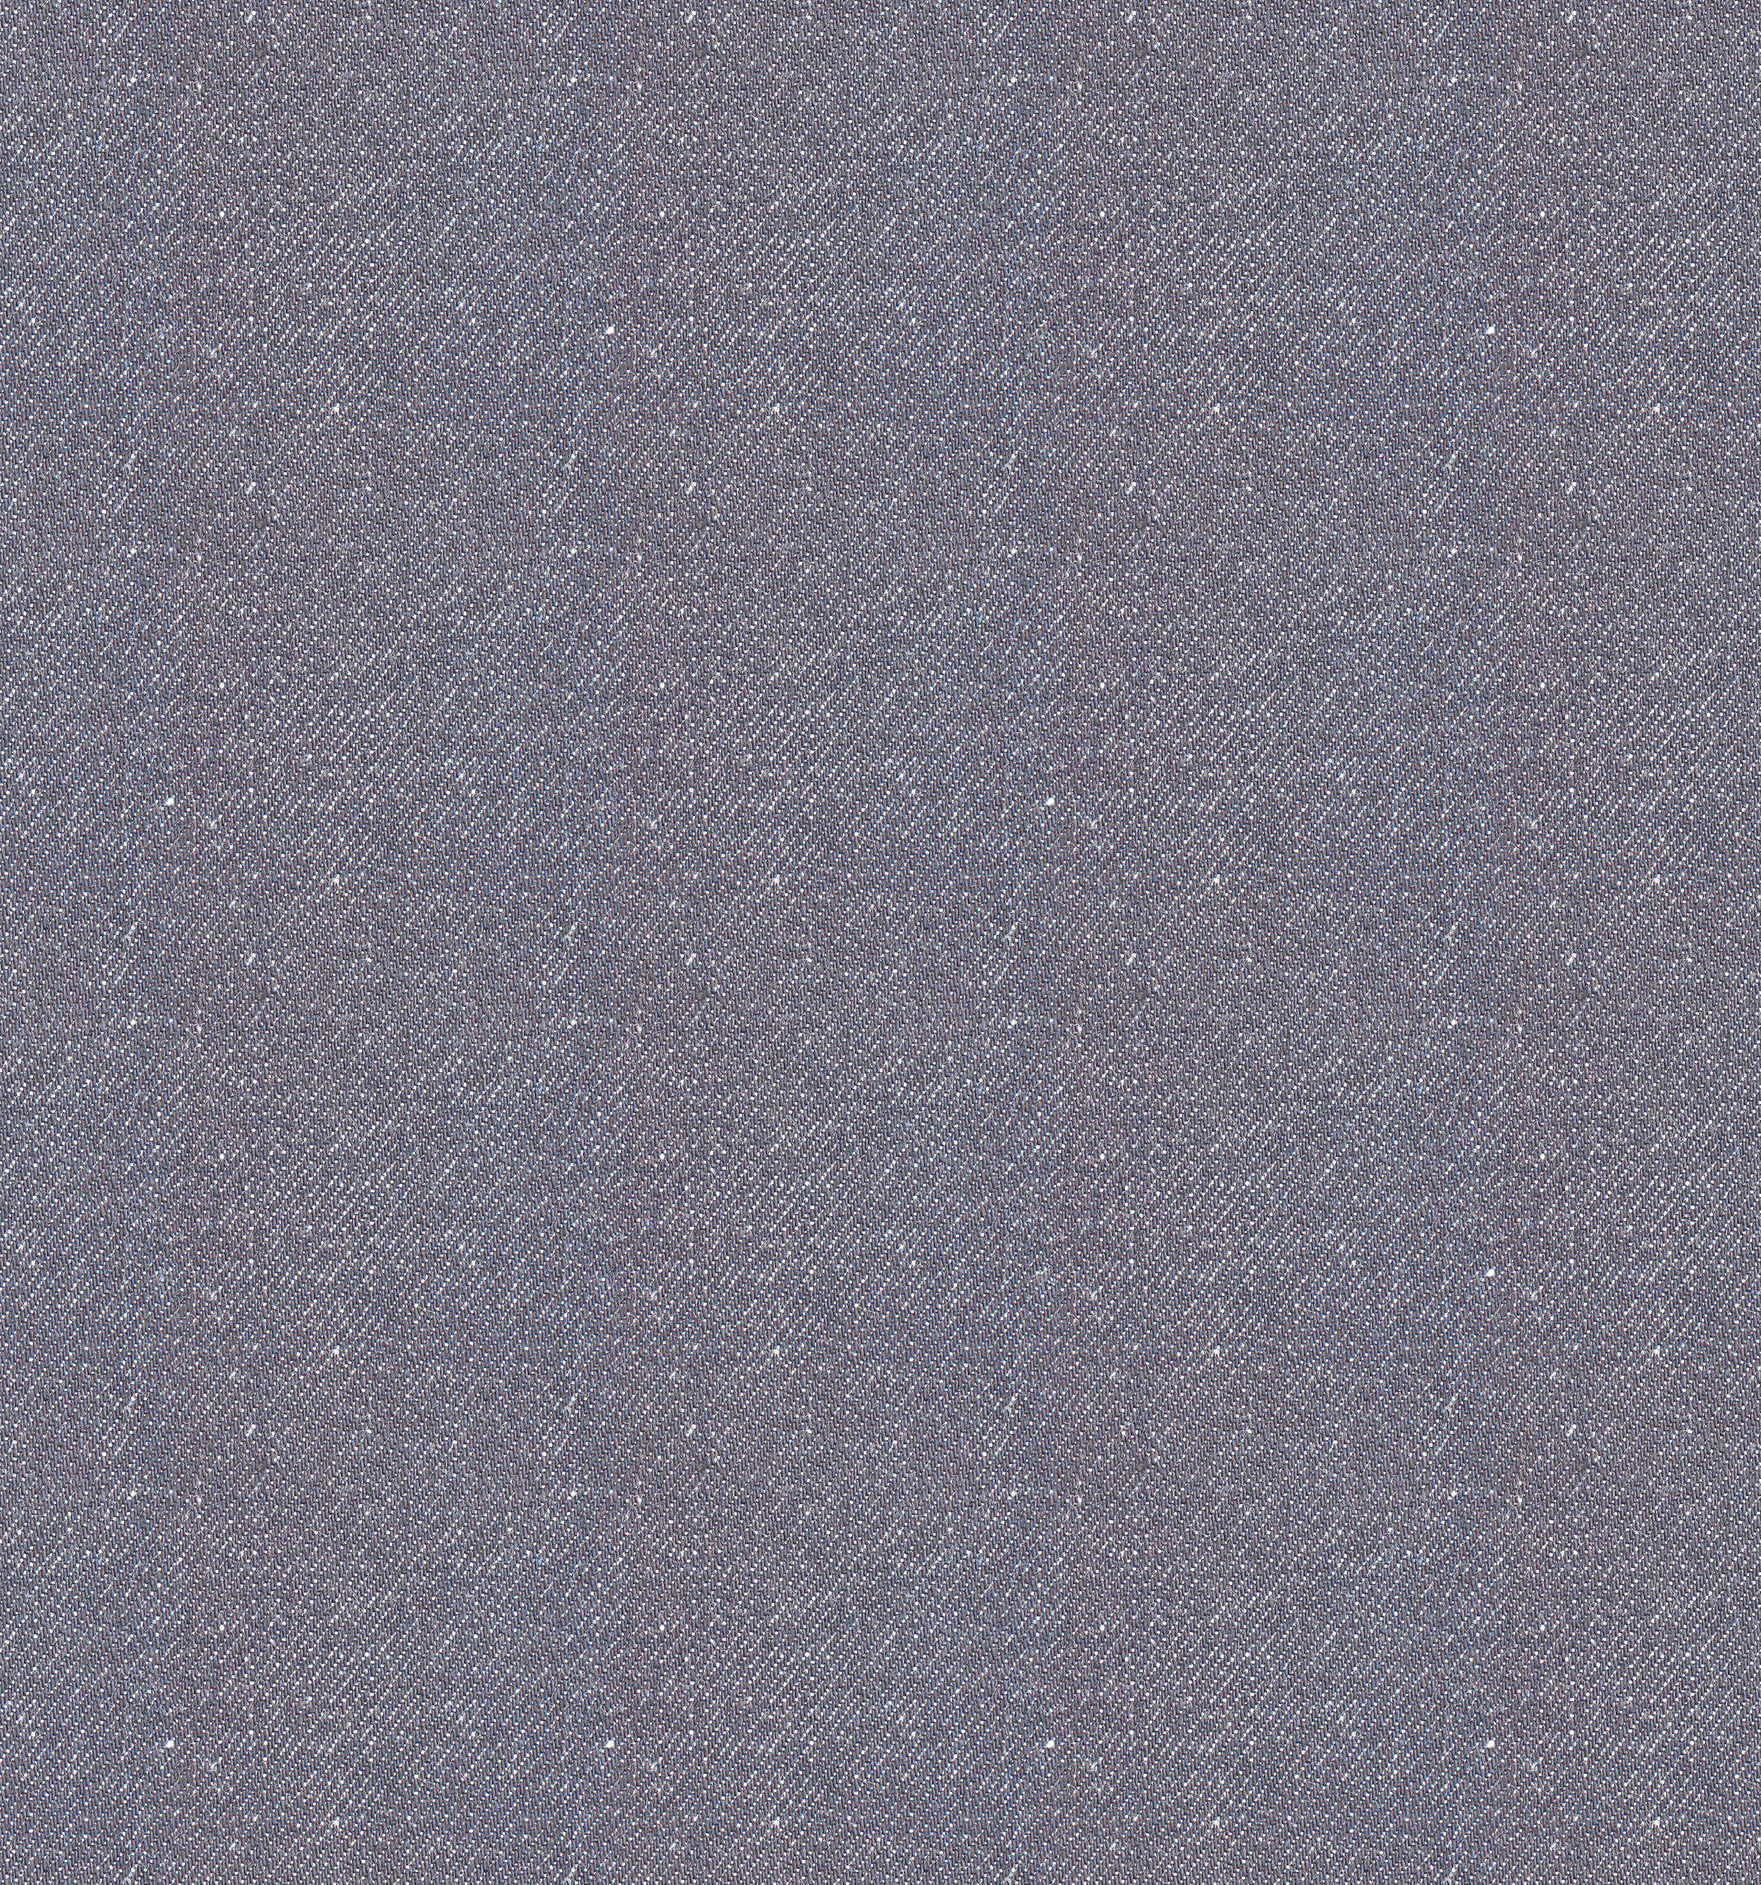 texture jeans cloth, download photo, background, jeans, , jeans texture, background